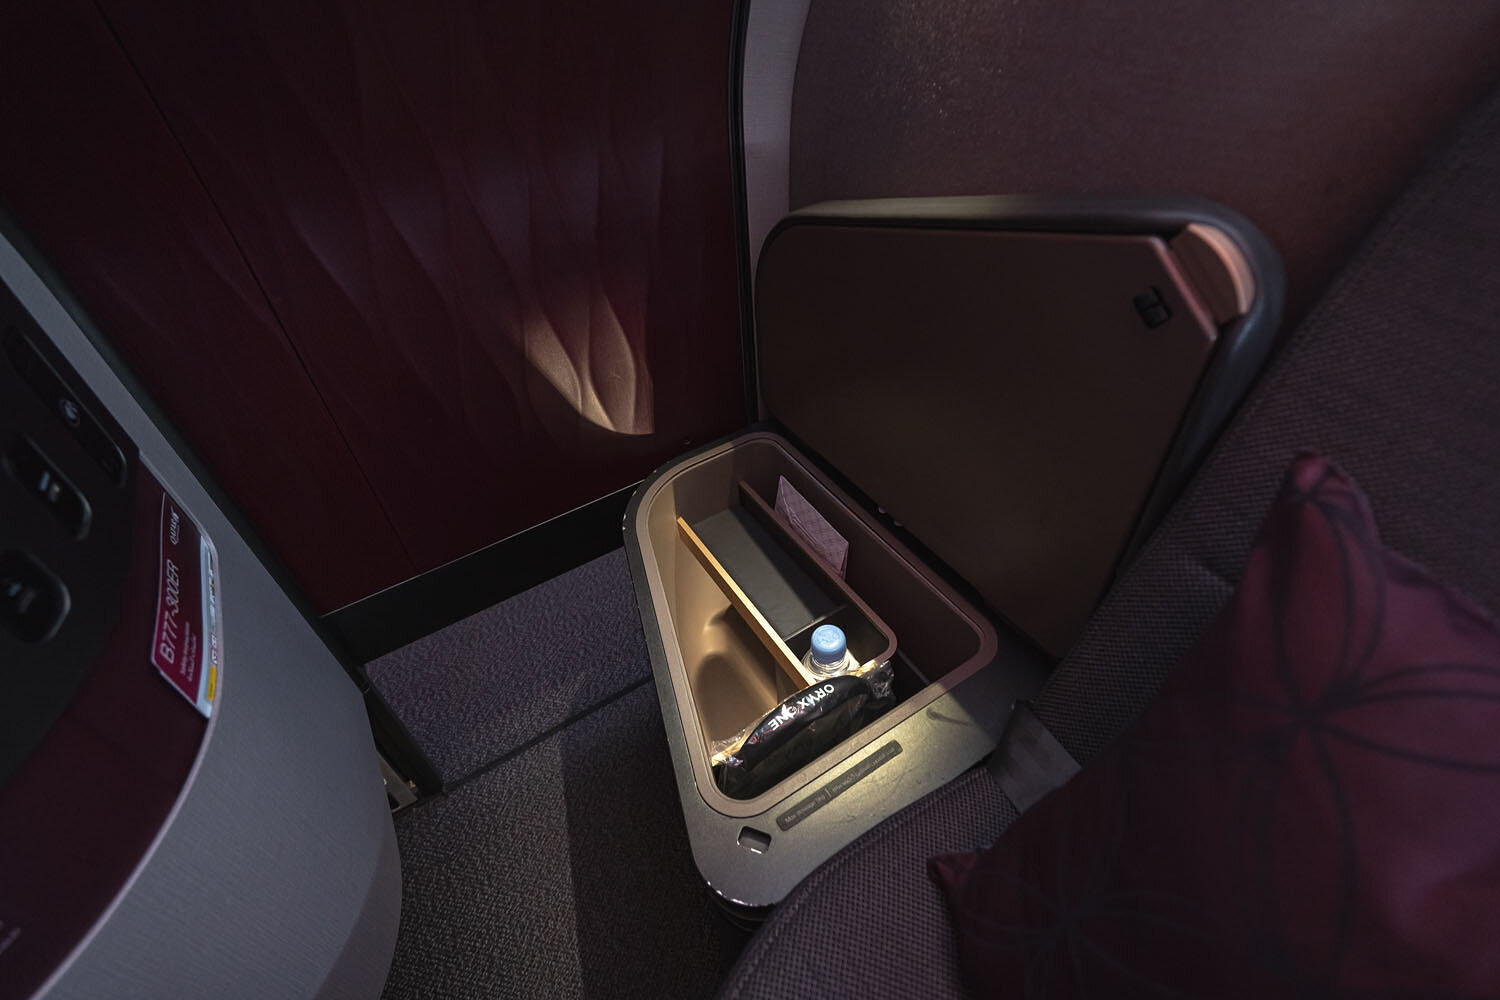 Small compartment by the seat. Also note that the sliding door does not go all the way down.